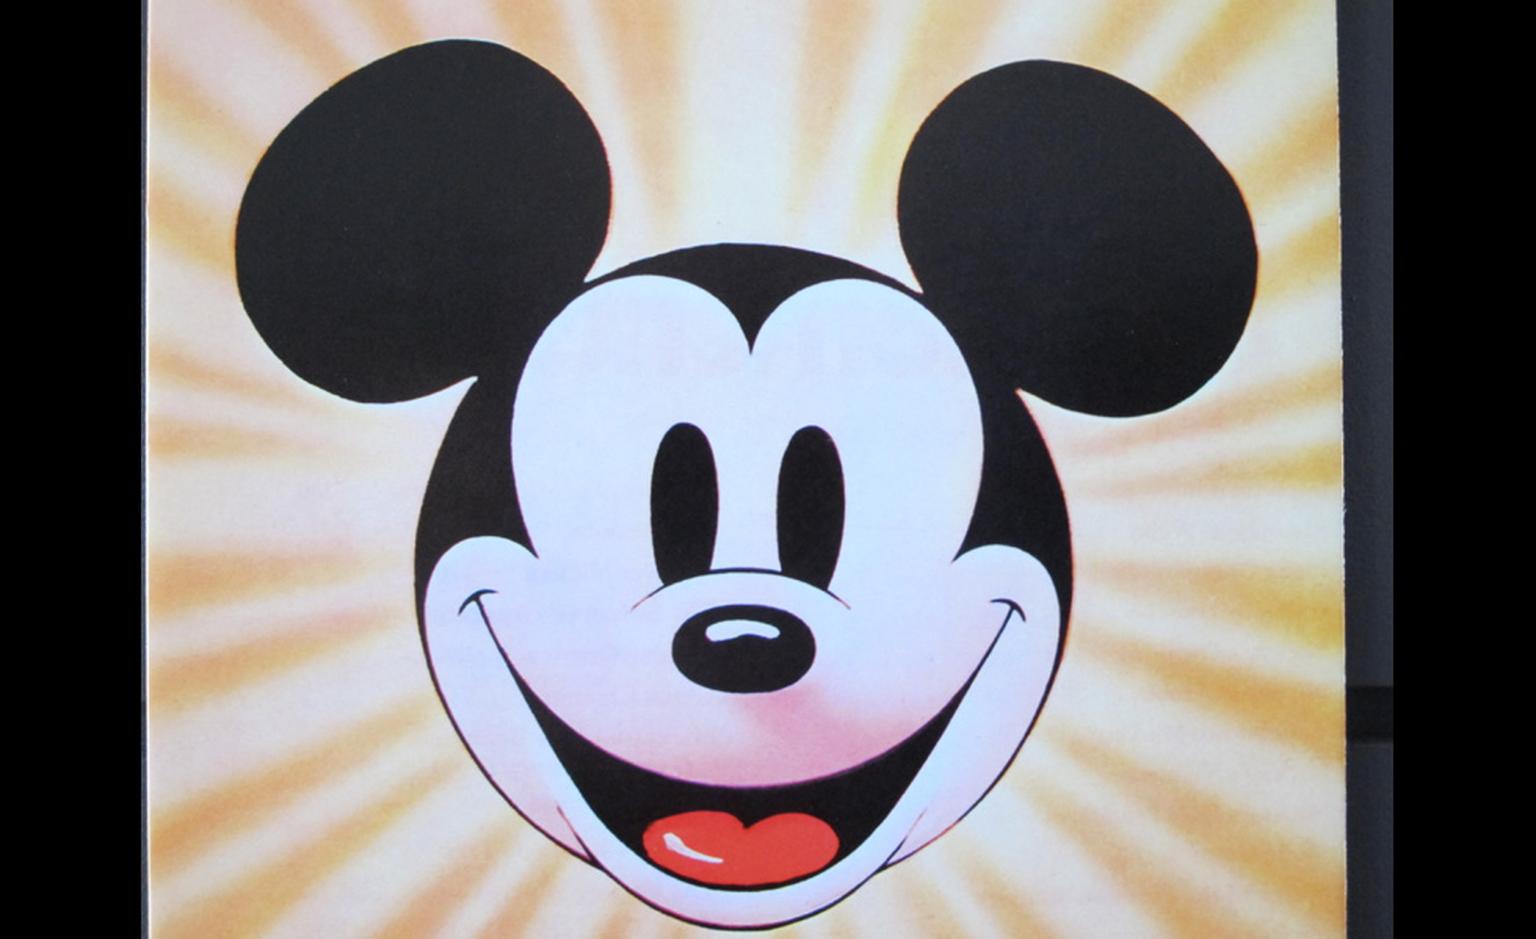 Beaming out, Mickey Mouse in his youth.